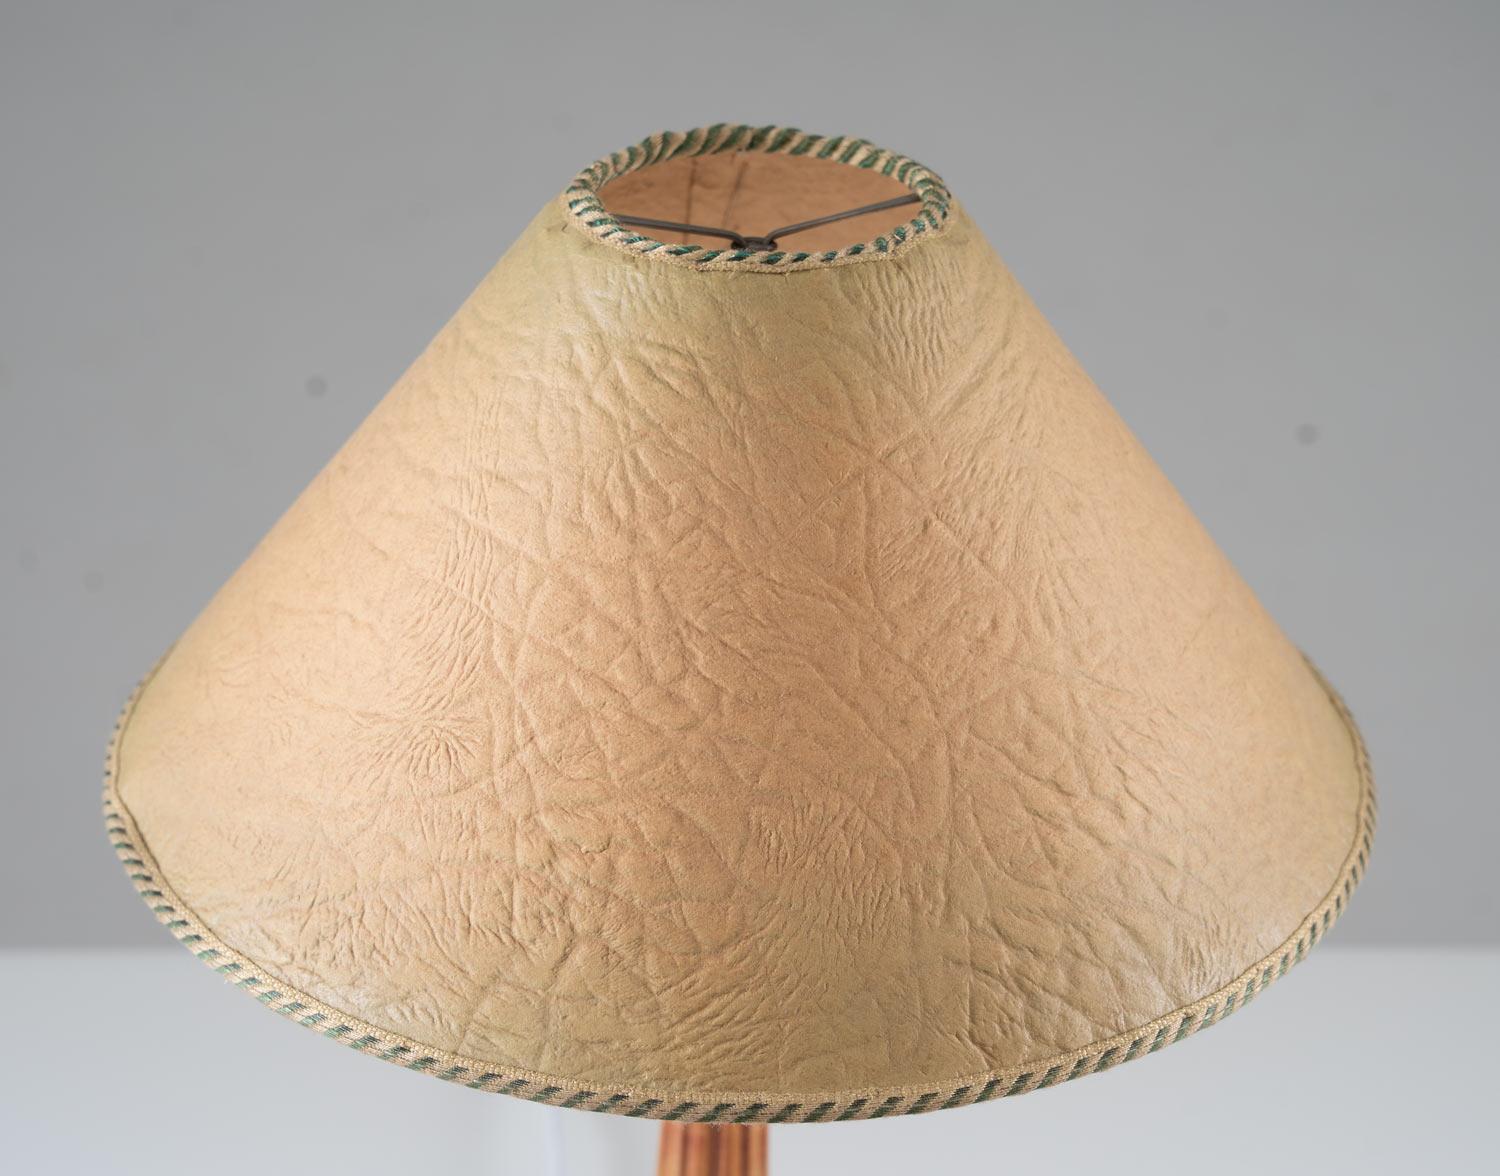 Swedish modern table lamp attributed to Hans Bergström, Sweden.
This lamp is made of oak with a beautiful tripod base in brass. 

Condition: Very good condition. The lamp comes with a vintage papyrus shade from the same era.